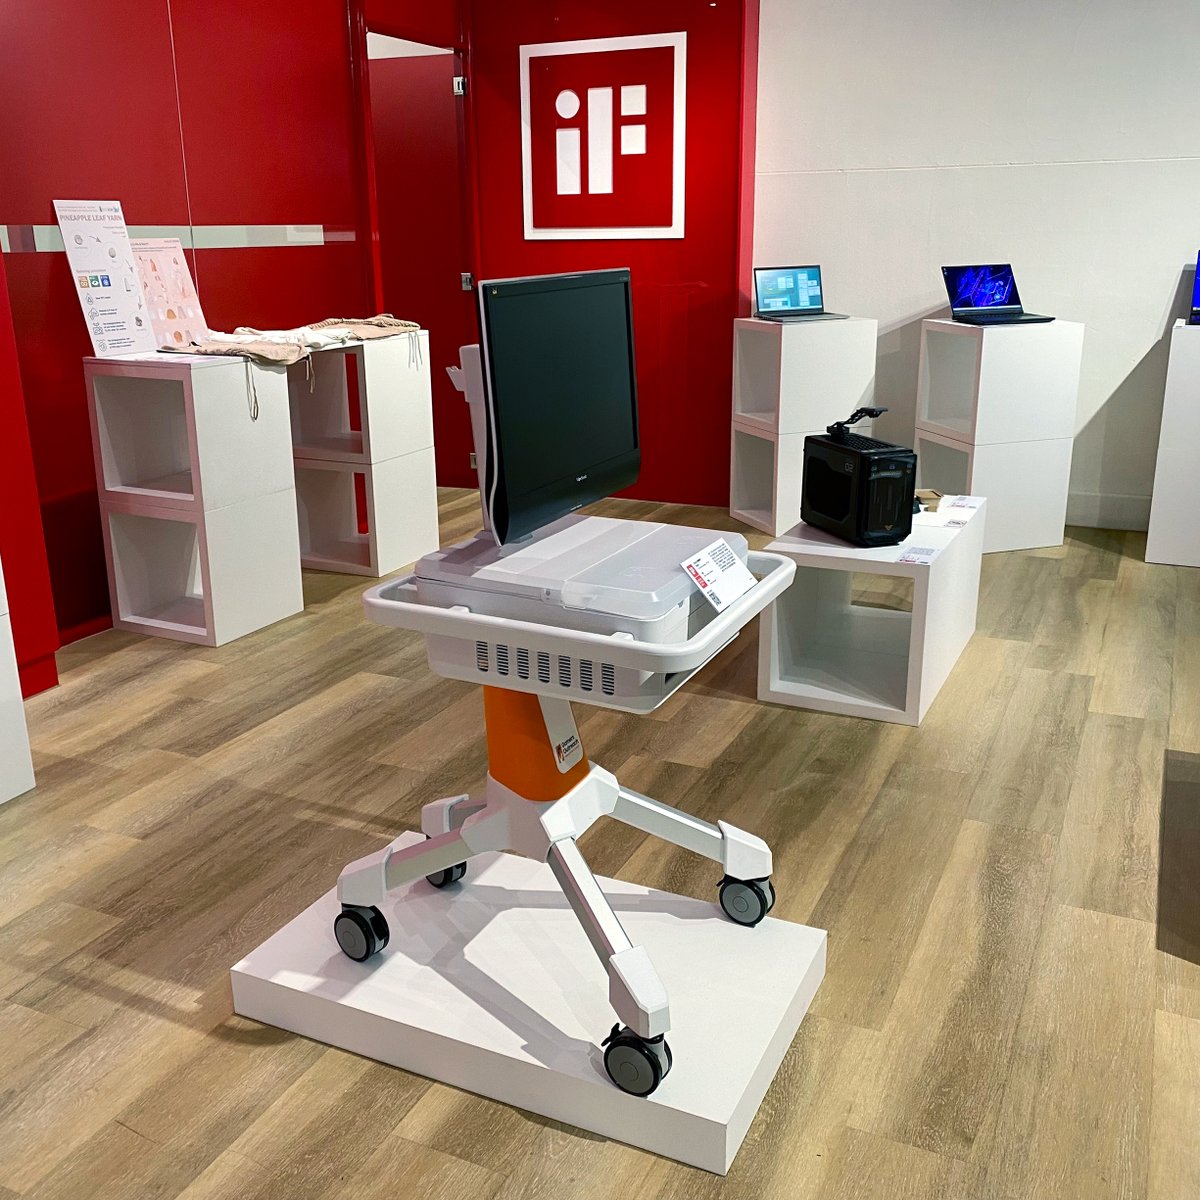 Earlier this year our GO Kart 3.0 won an #iFDesignAward 🏆

And now it's on exhibition with other winners in the iF Design Salon in Taipei, Taiwan ✨